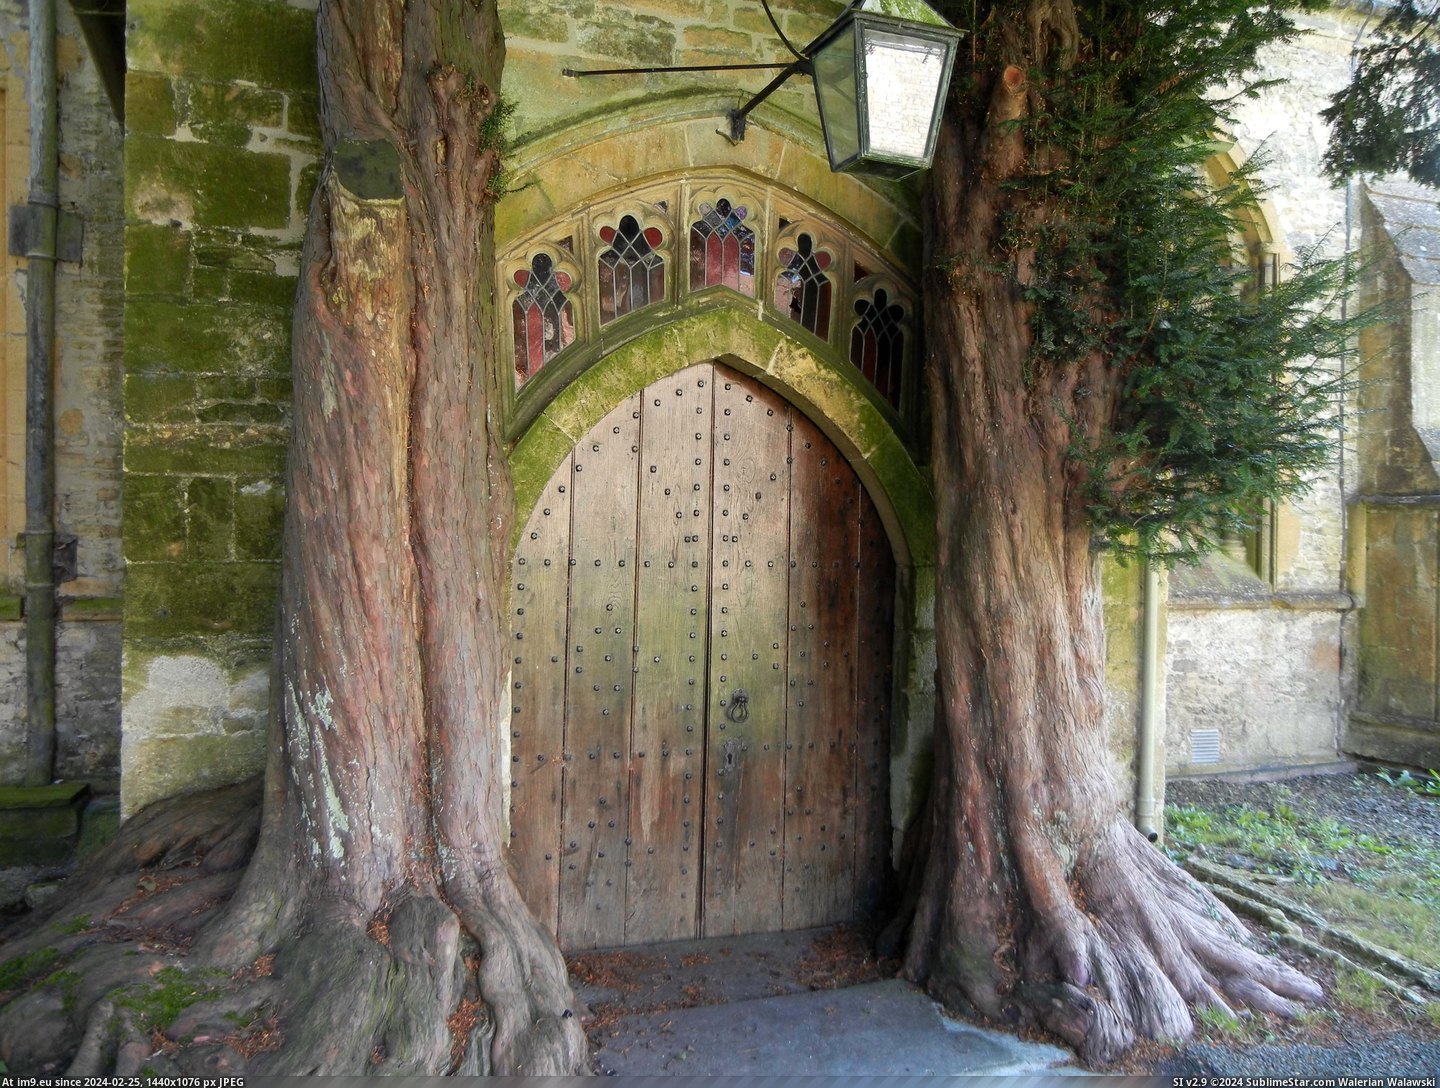 #Door #Church #Entrance #Tolkien #Gloucestershire #Medieval #Inspiration #Believed [Pics] Medieval church door in Gloucestershire believed to be the inspiration for Tolkien's entrance to Moria Pic. (Image of album My r/PICS favs))